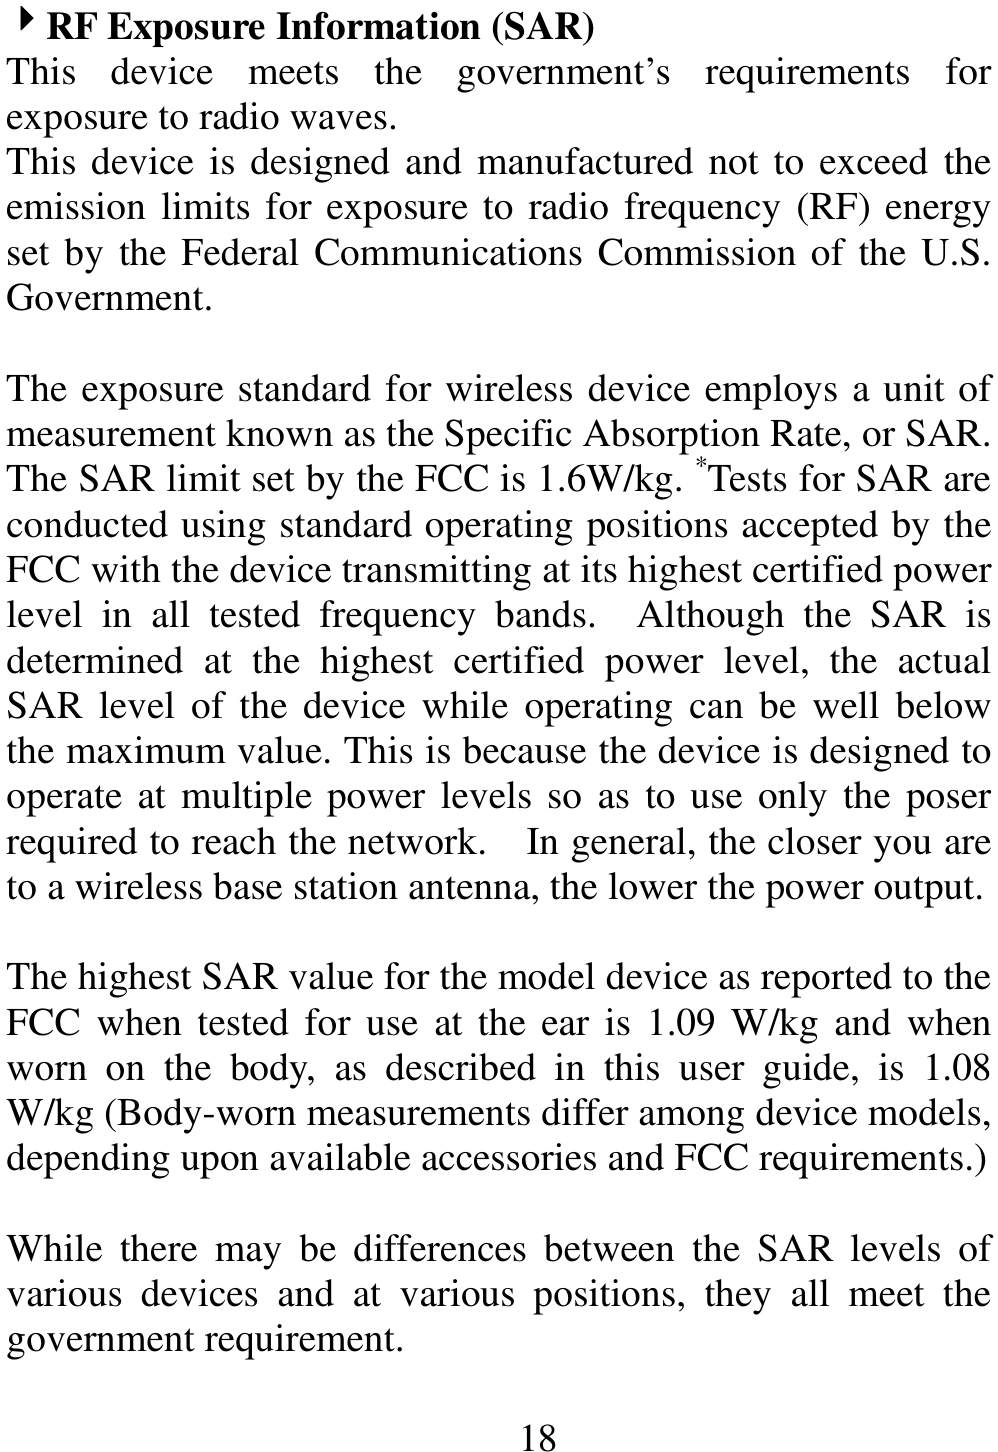                                                       18 4444RF Exposure Information (SAR) This  device  meets  the  government’s  requirements  for exposure to radio waves. This device is designed and manufactured not to exceed the emission limits for exposure to radio frequency (RF) energy set by the Federal Communications Commission of the U.S. Government.      The exposure standard for wireless device employs a unit of measurement known as the Specific Absorption Rate, or SAR. The SAR limit set by the FCC is 1.6W/kg. *Tests for SAR are conducted using standard operating positions accepted by the FCC with the device transmitting at its highest certified power level  in  all  tested  frequency  bands.    Although  the  SAR  is determined  at  the  highest  certified  power  level,  the  actual SAR  level  of  the device while operating can be  well  below the maximum value. This is because the device is designed to operate at multiple power levels so as to use only the poser required to reach the network.    In general, the closer you are to a wireless base station antenna, the lower the power output.  The highest SAR value for the model device as reported to the FCC  when tested for use  at the ear is  1.09 W/kg  and  when worn  on  the  body,  as  described  in  this  user  guide,  is  1.08 W/kg (Body-worn measurements differ among device models, depending upon available accessories and FCC requirements.)  While  there  may  be  differences  between  the  SAR  levels  of various  devices  and  at  various  positions,  they  all  meet  the government requirement.  